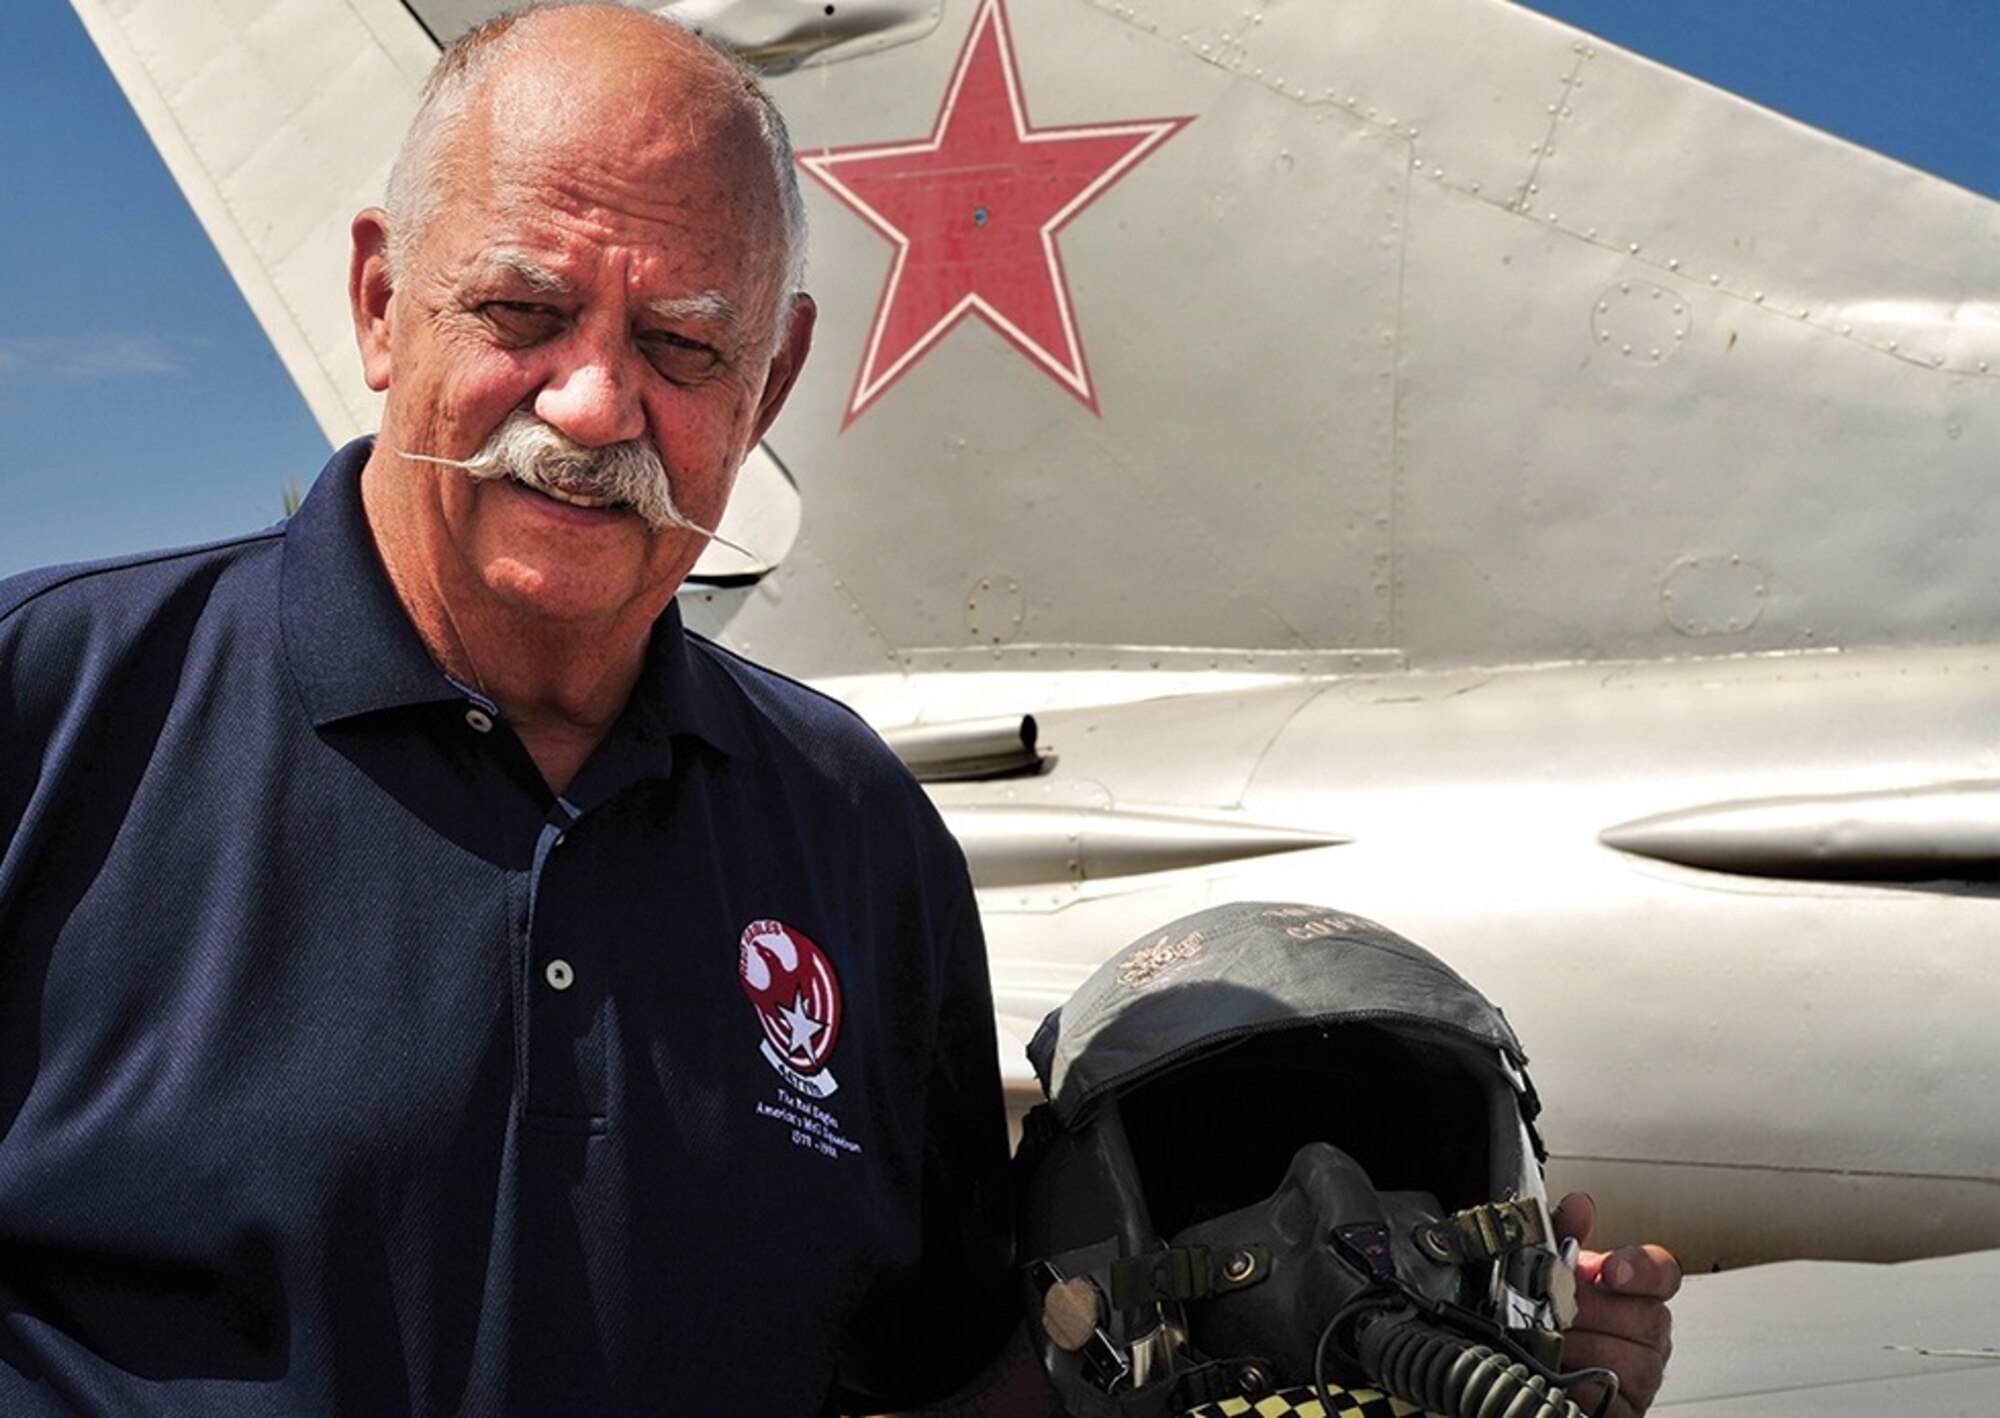 Colonel (Ret.) Gaillard Peck Jr. changed history when he co-founded the MiG operation at Tonopah, Nev., paving the way for more than 6,000 Airmen, Sailors and Marines to fight the MiG-17, MiG-21 and MiG-23 in combat operations overseas.  He started his aviation career at age 16, flying in the backseat of a T-38 with his father, an Army Air Corps officer who later transitioned to the newly created U.S. Air Force.  Peck received his commission from the Air Force Academy in 1962.  During his time as a fighter pilot in the 8th Tactical Fighter Wing at Ubon Royal Thai Air Force Base, Thailand, in the 433rd Tactical Fighter Squadron, he flew 163 combat missions in Vietnam and Laos.  Peck served as the vice commander of the 18th Wing at Kadena AB, Japan, and later commanded the 26th Tactical Reconnaissance Wing at Zweibrucken AB, Germany.  Peck’s most cherished lesson from his Air Force career is that it provided sound values and understanding of MacArthur’s famous speech on duty, honor and country.  Peck currently serves as the subject matter expert for the Air Force Weapons School at Nellis AFB, Nev.